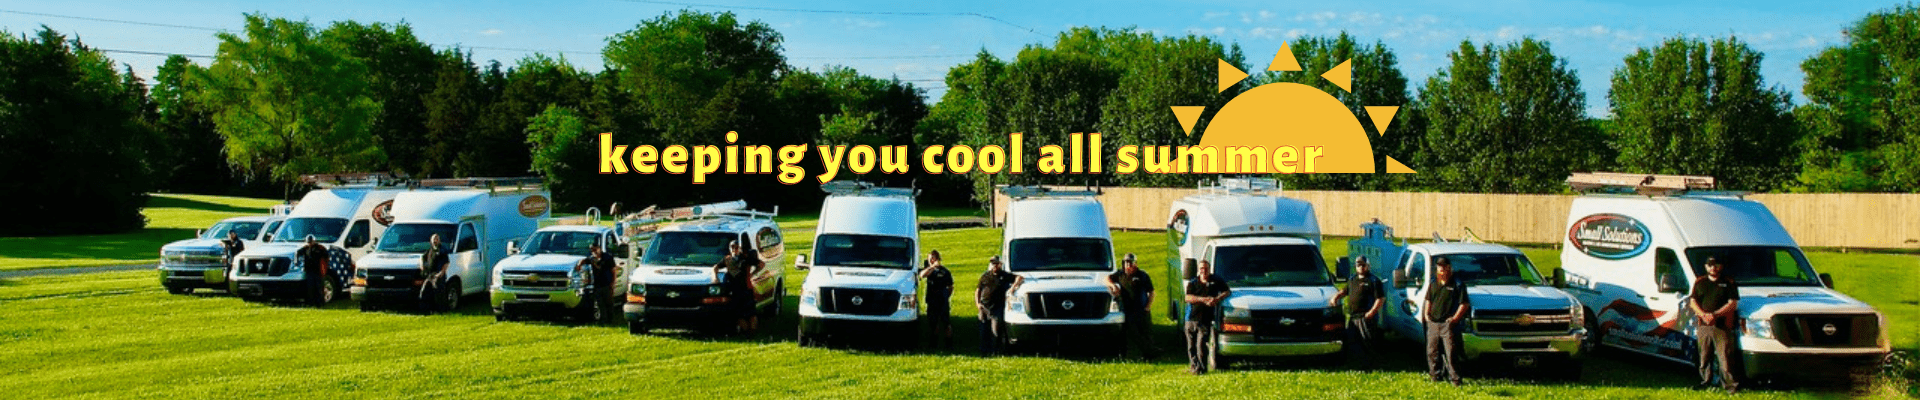 small solution hvac repair and services